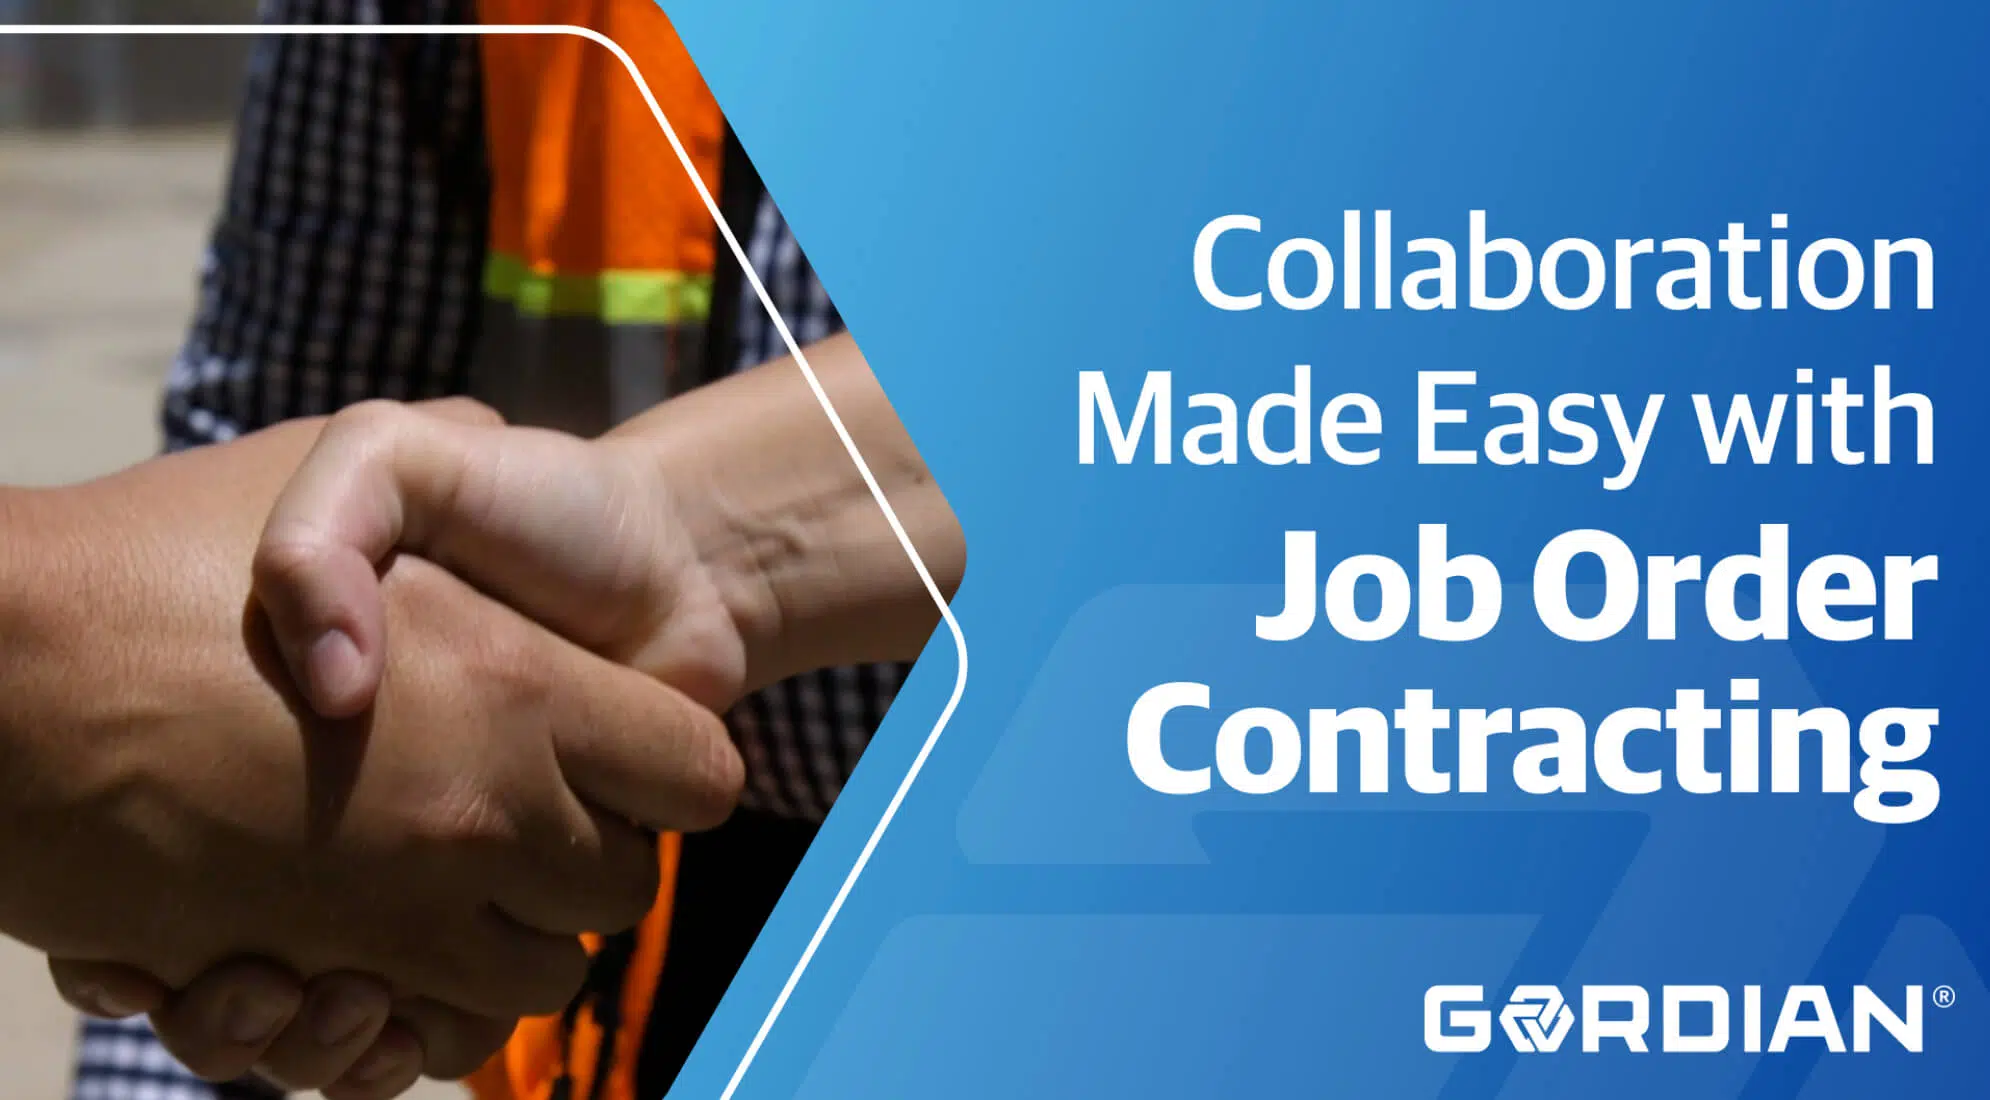 Job Order Contracting: Collaboration Made Easy 2